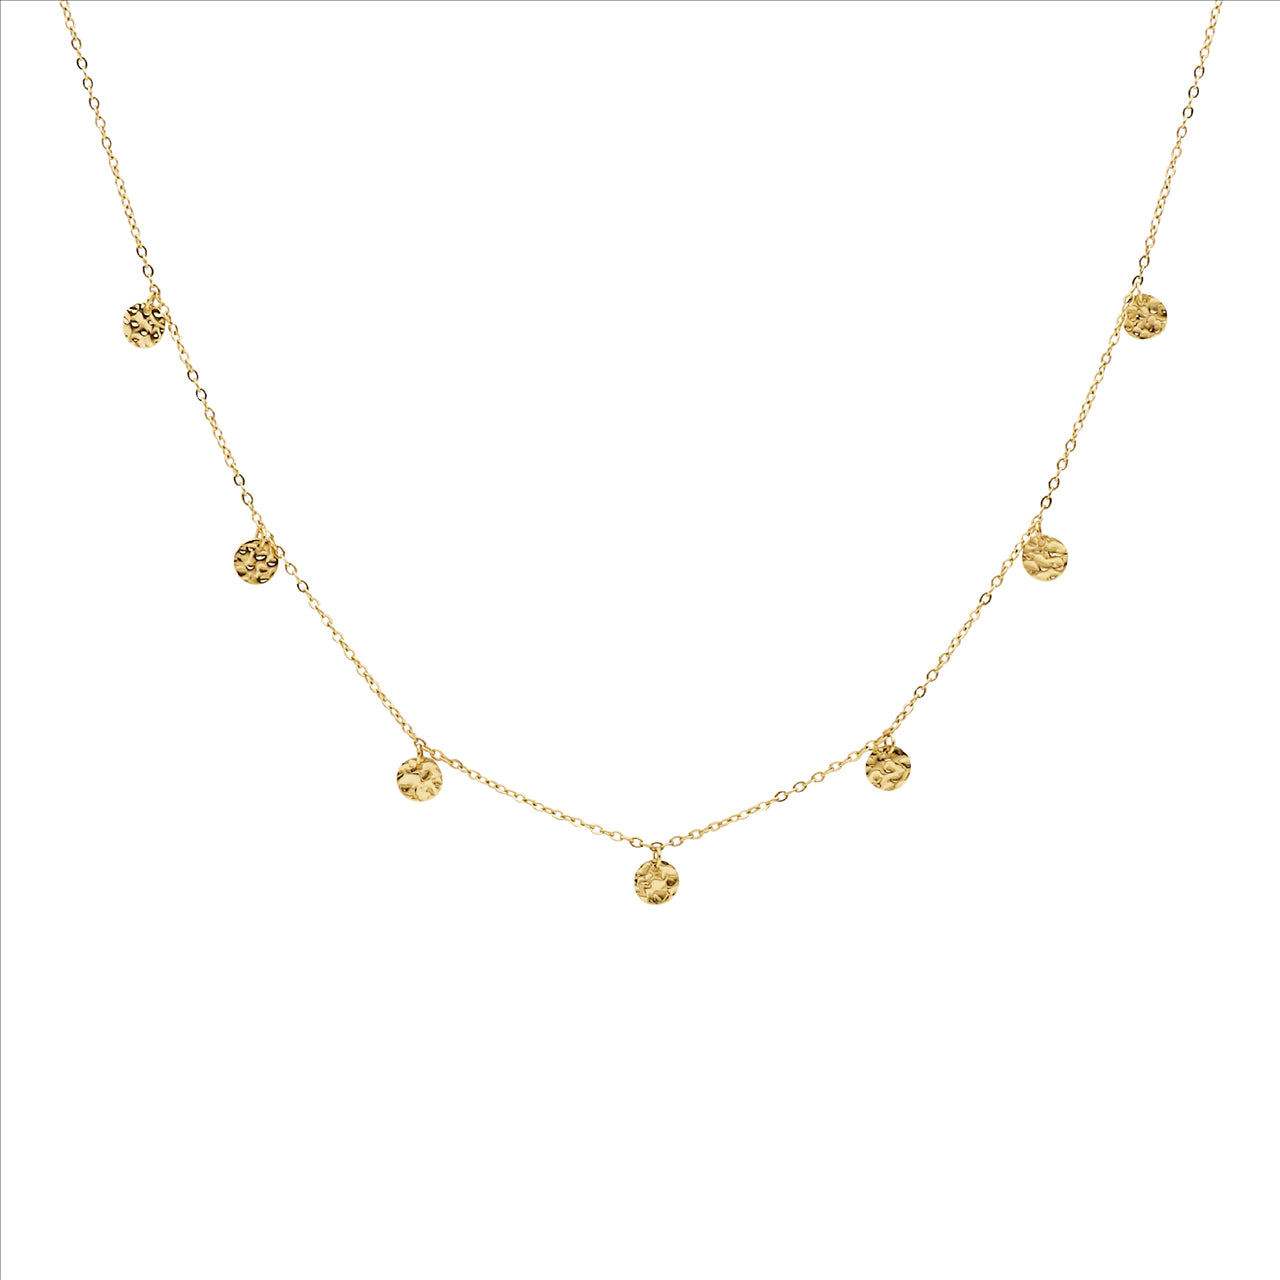 Stainless steel necklace 40+5cm w/ 7x disk feature, gold IP plating